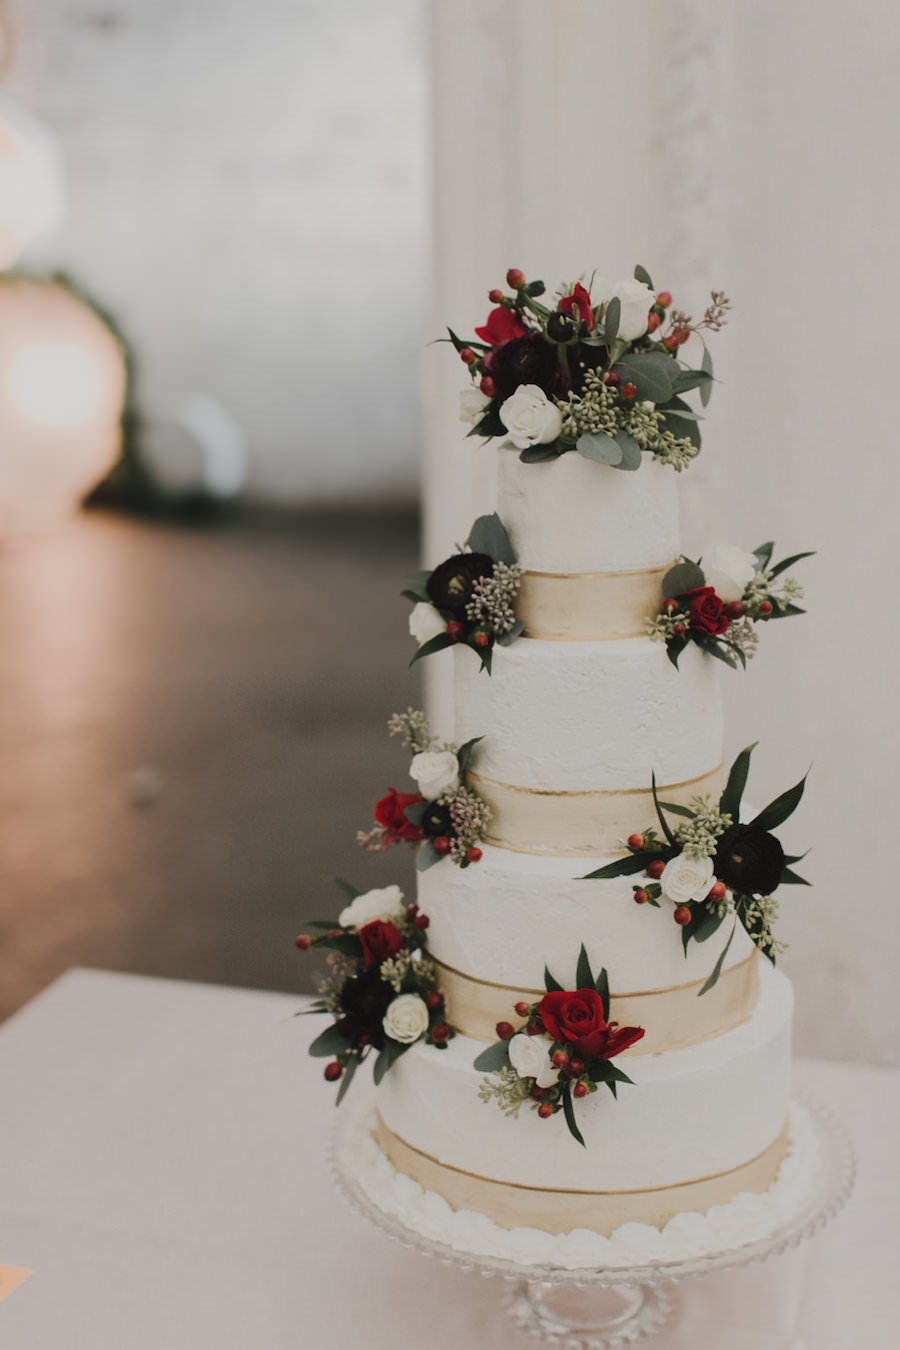 4-Tiered, White Round Wedding Cake with Gold Colored Accent and White, Red, and Plum Flowers